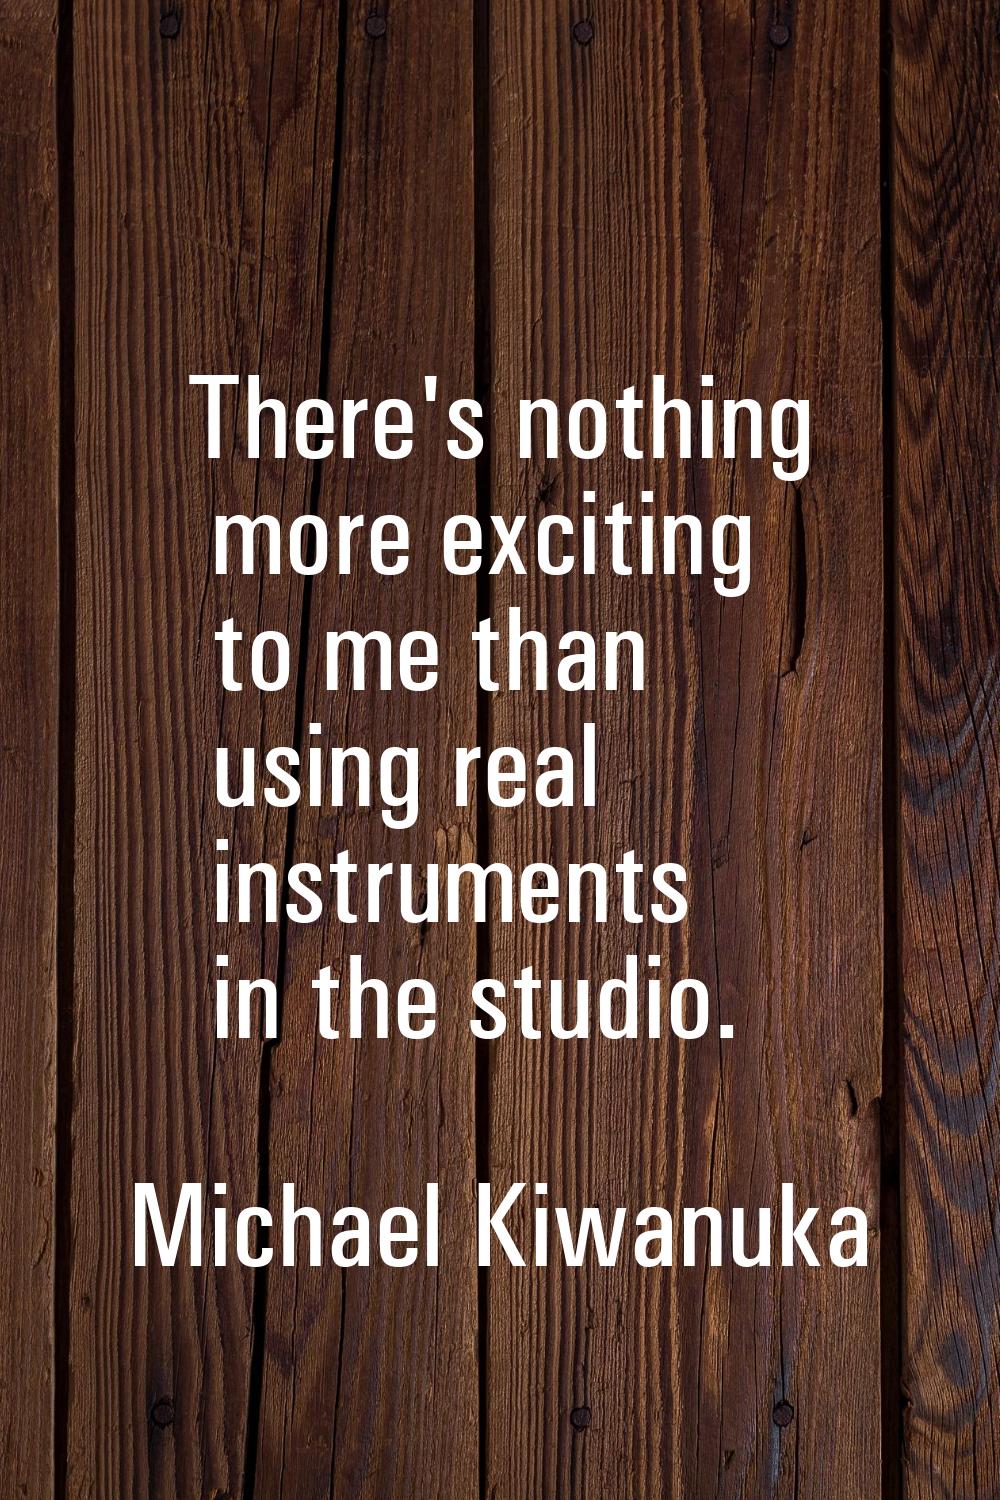 There's nothing more exciting to me than using real instruments in the studio.